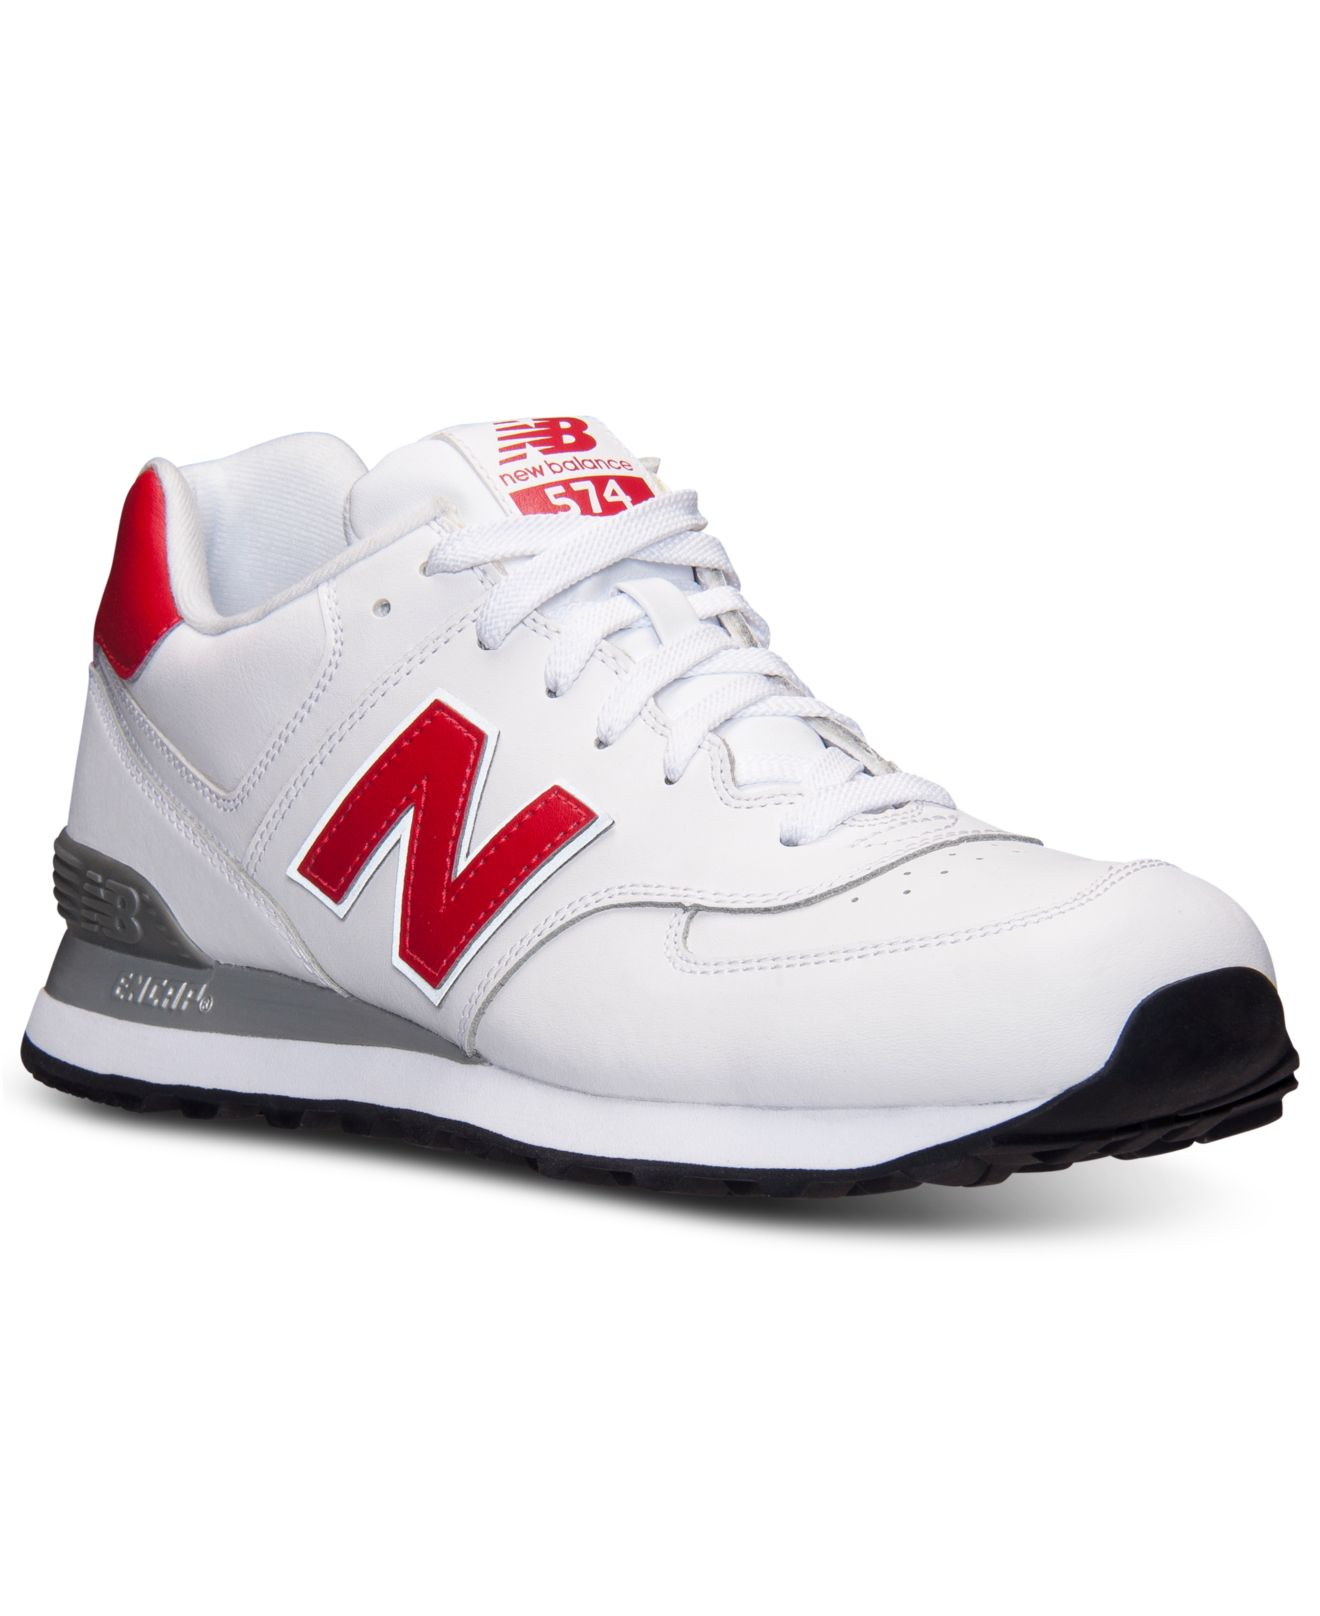 Lyst - New Balance Men'S 574 Leather Casual Sneakers From Finish Line ...